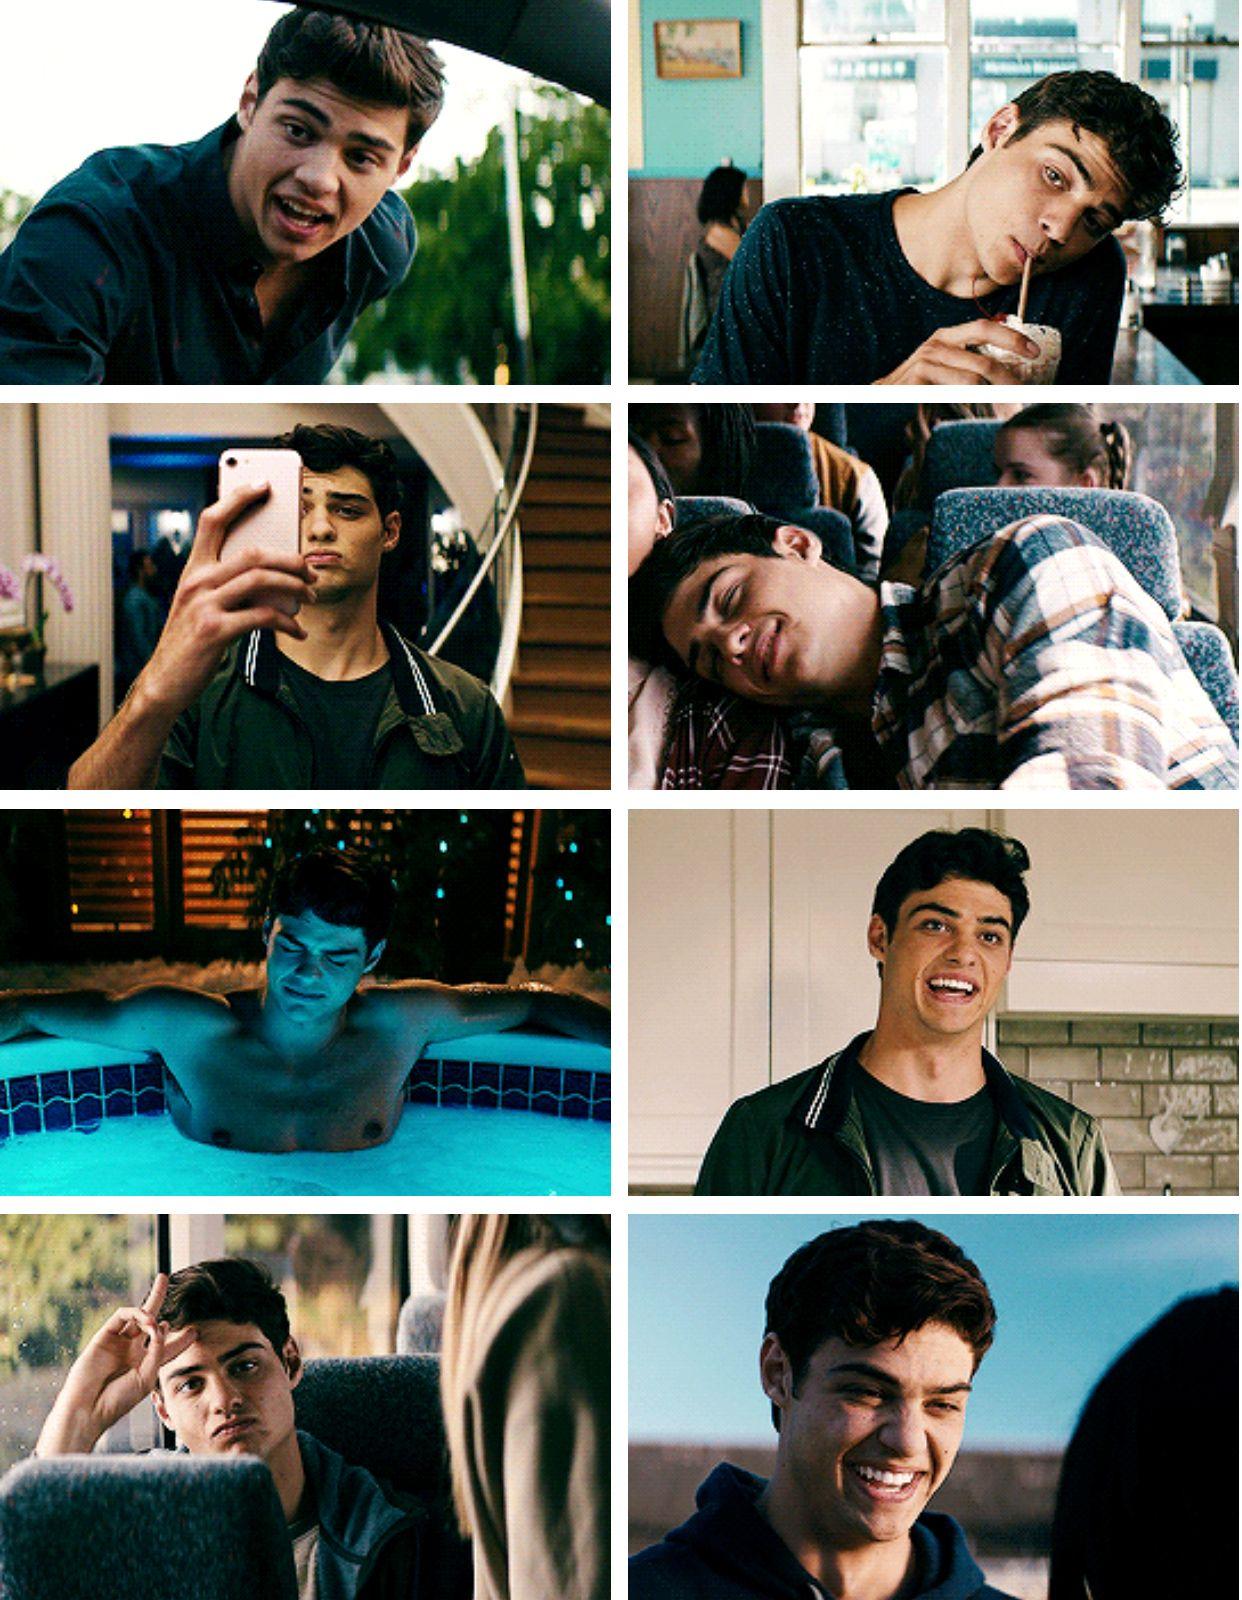 Noah Centineo as Peter Kavinsky in To All the Boys I've Loved Before